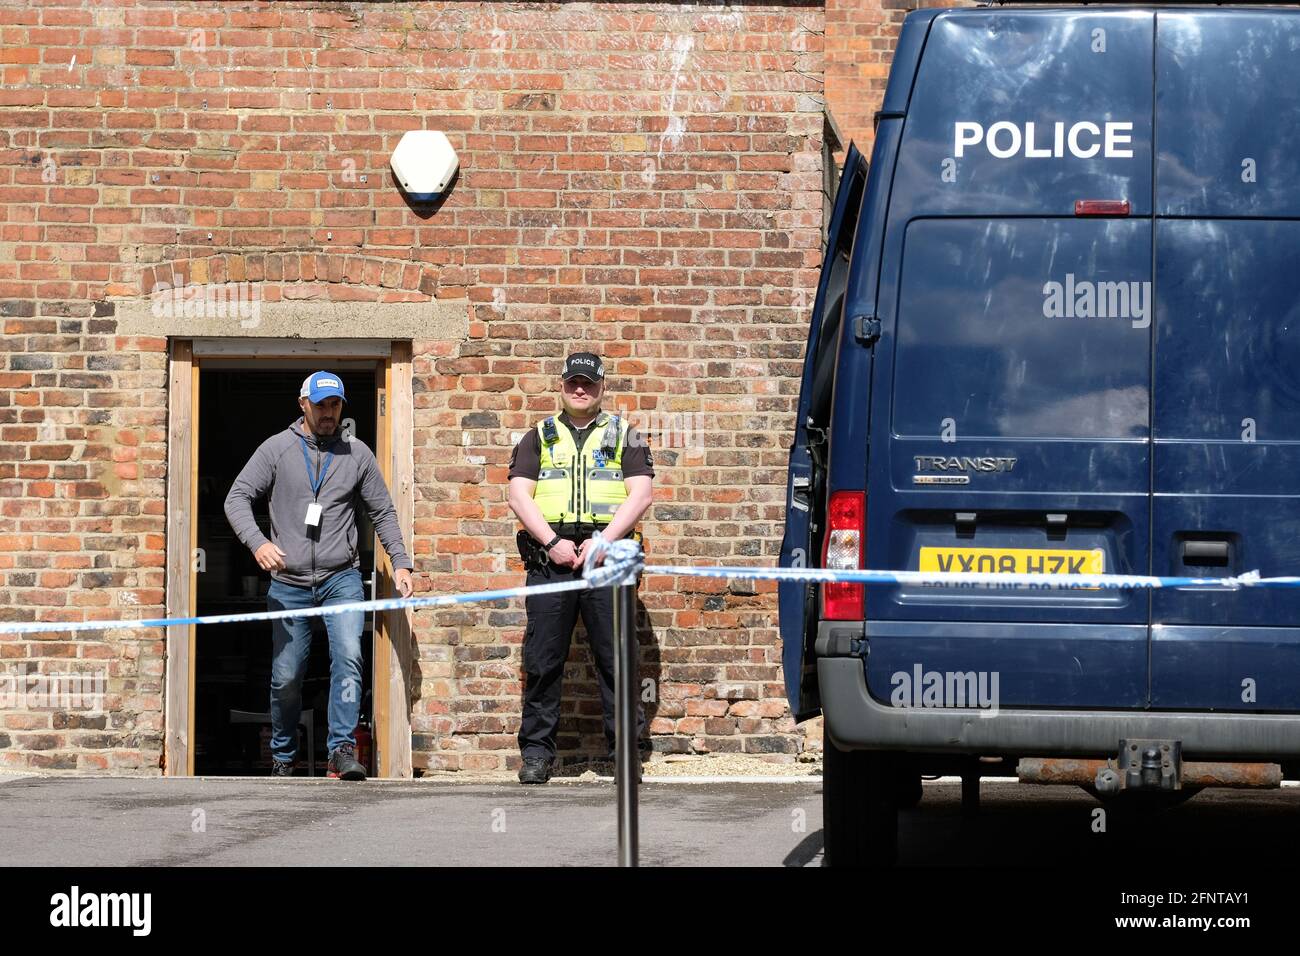 Gloucester, Gloucestershire, UK - Wednesday 19th May 2021 - Police officers at the rear of the Clean Plate cafe as Police begin excavations in the search for Mary Bastholm who went missing in 1968 aged just 15 years old and who may have been a victim of serial killer Fred West. Photo Steven May / Alamy Live News Stock Photo